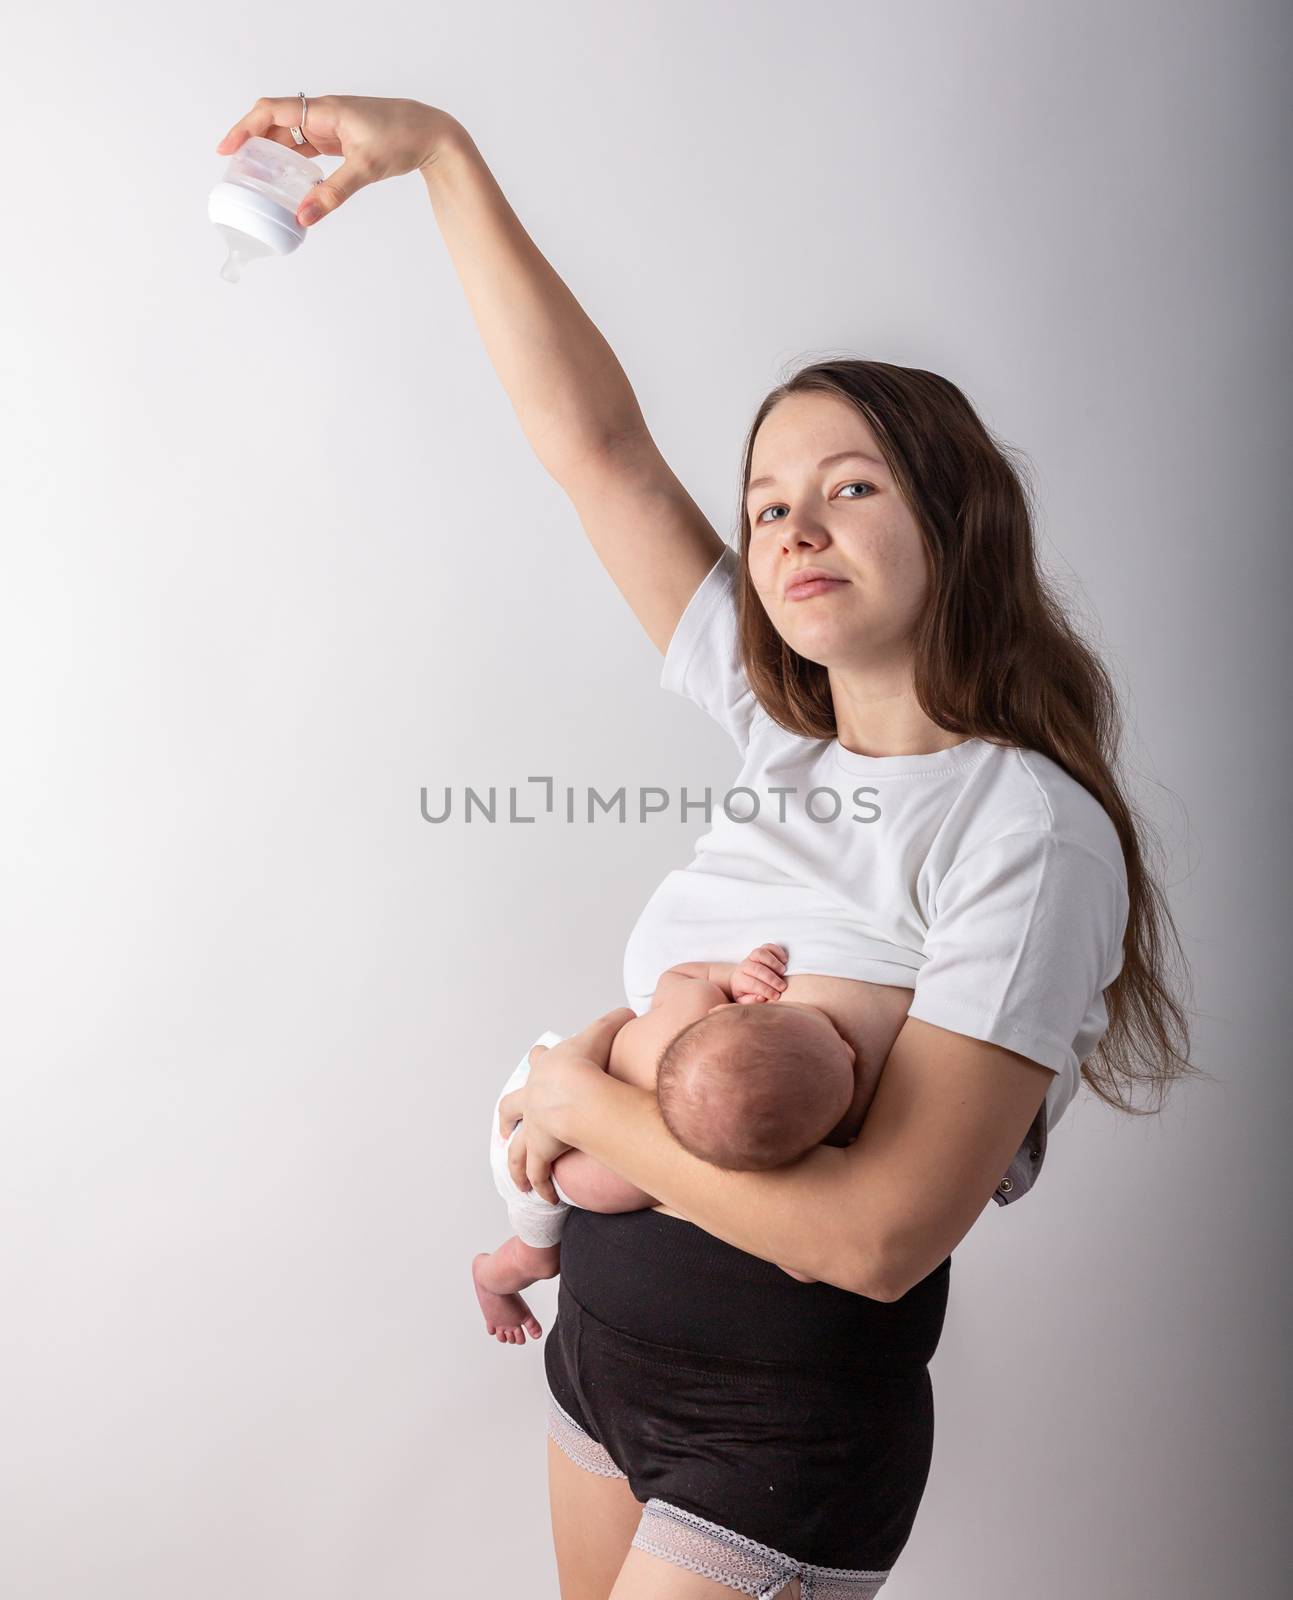 A mother breastfeeds a baby, not a bottle. Natural feeding concept. by Vassiliy